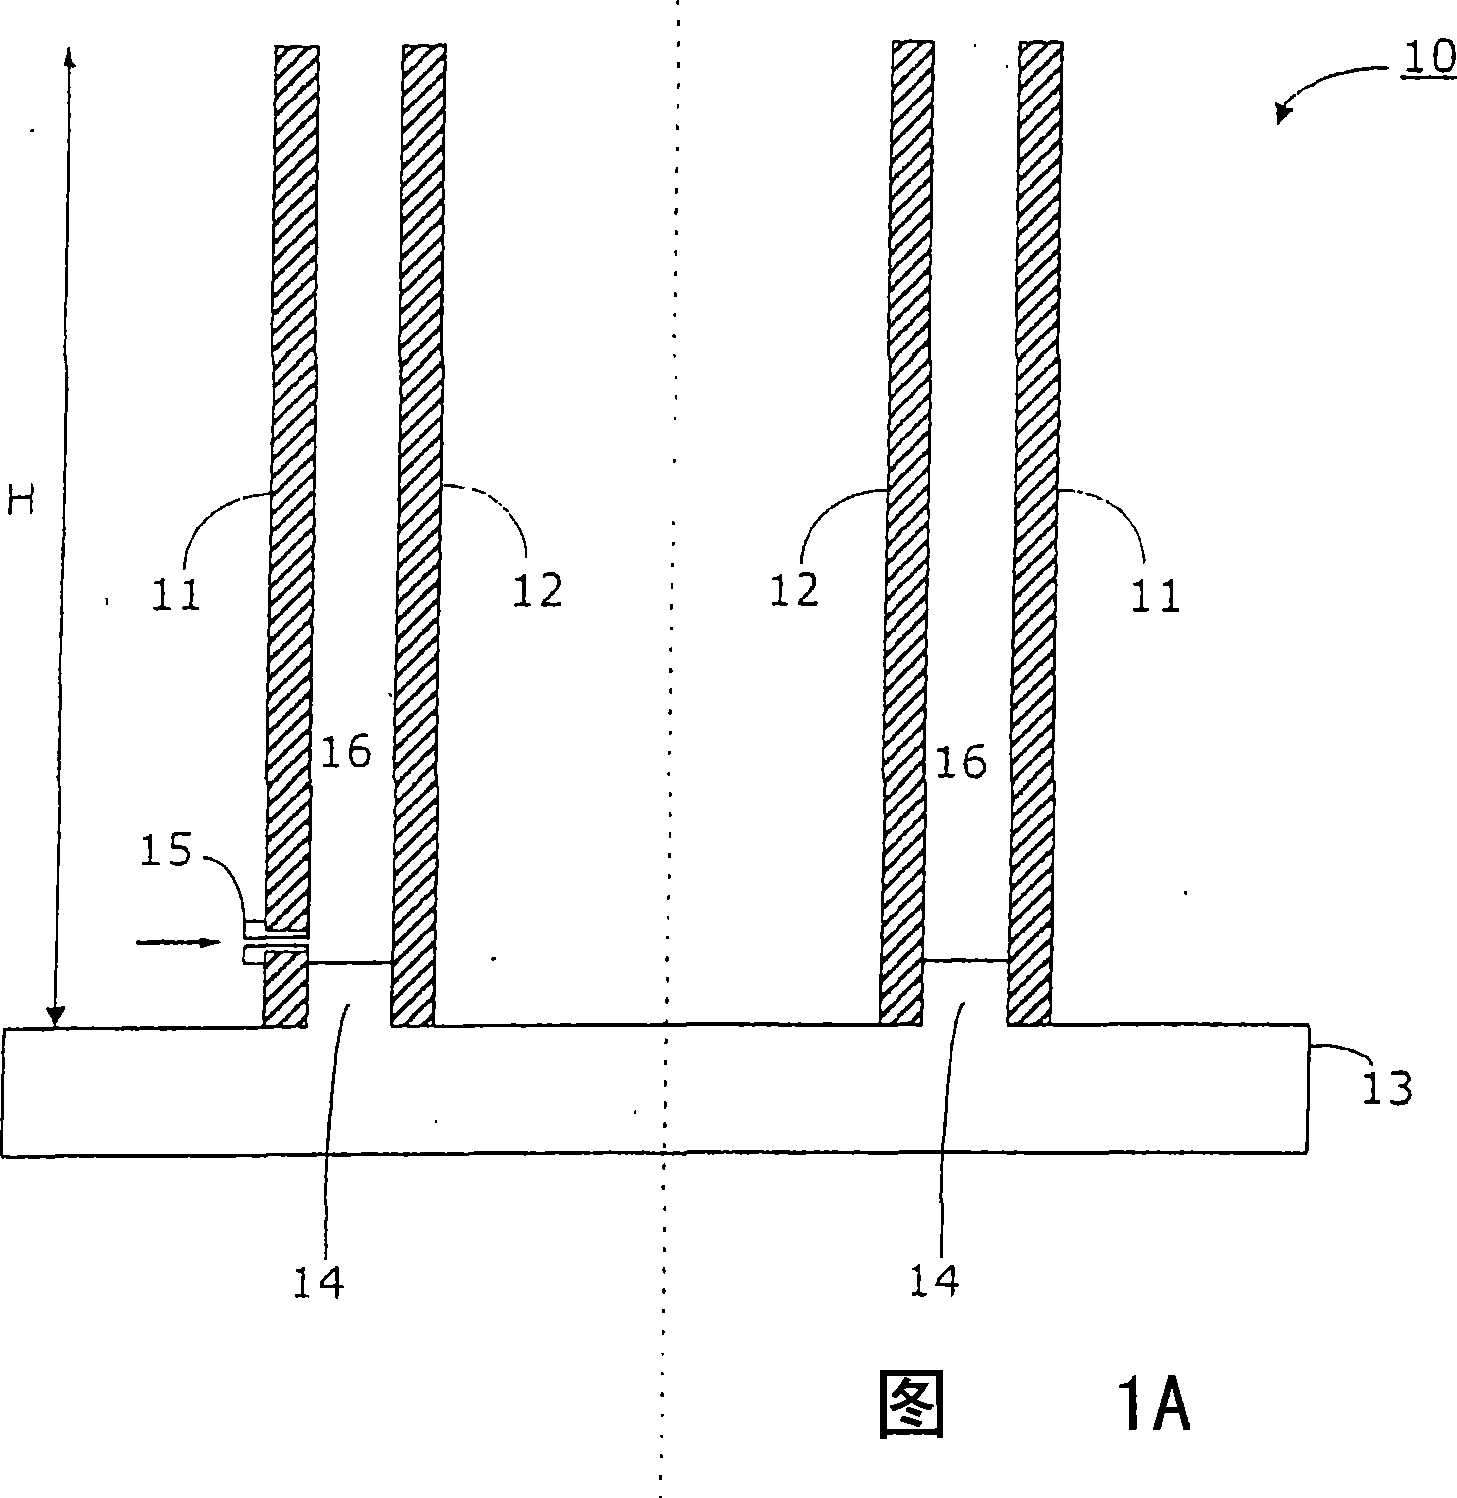 Method for vertically extruding a concrete element, device for producing a concrete element and wind turbine generator tower produced by this method